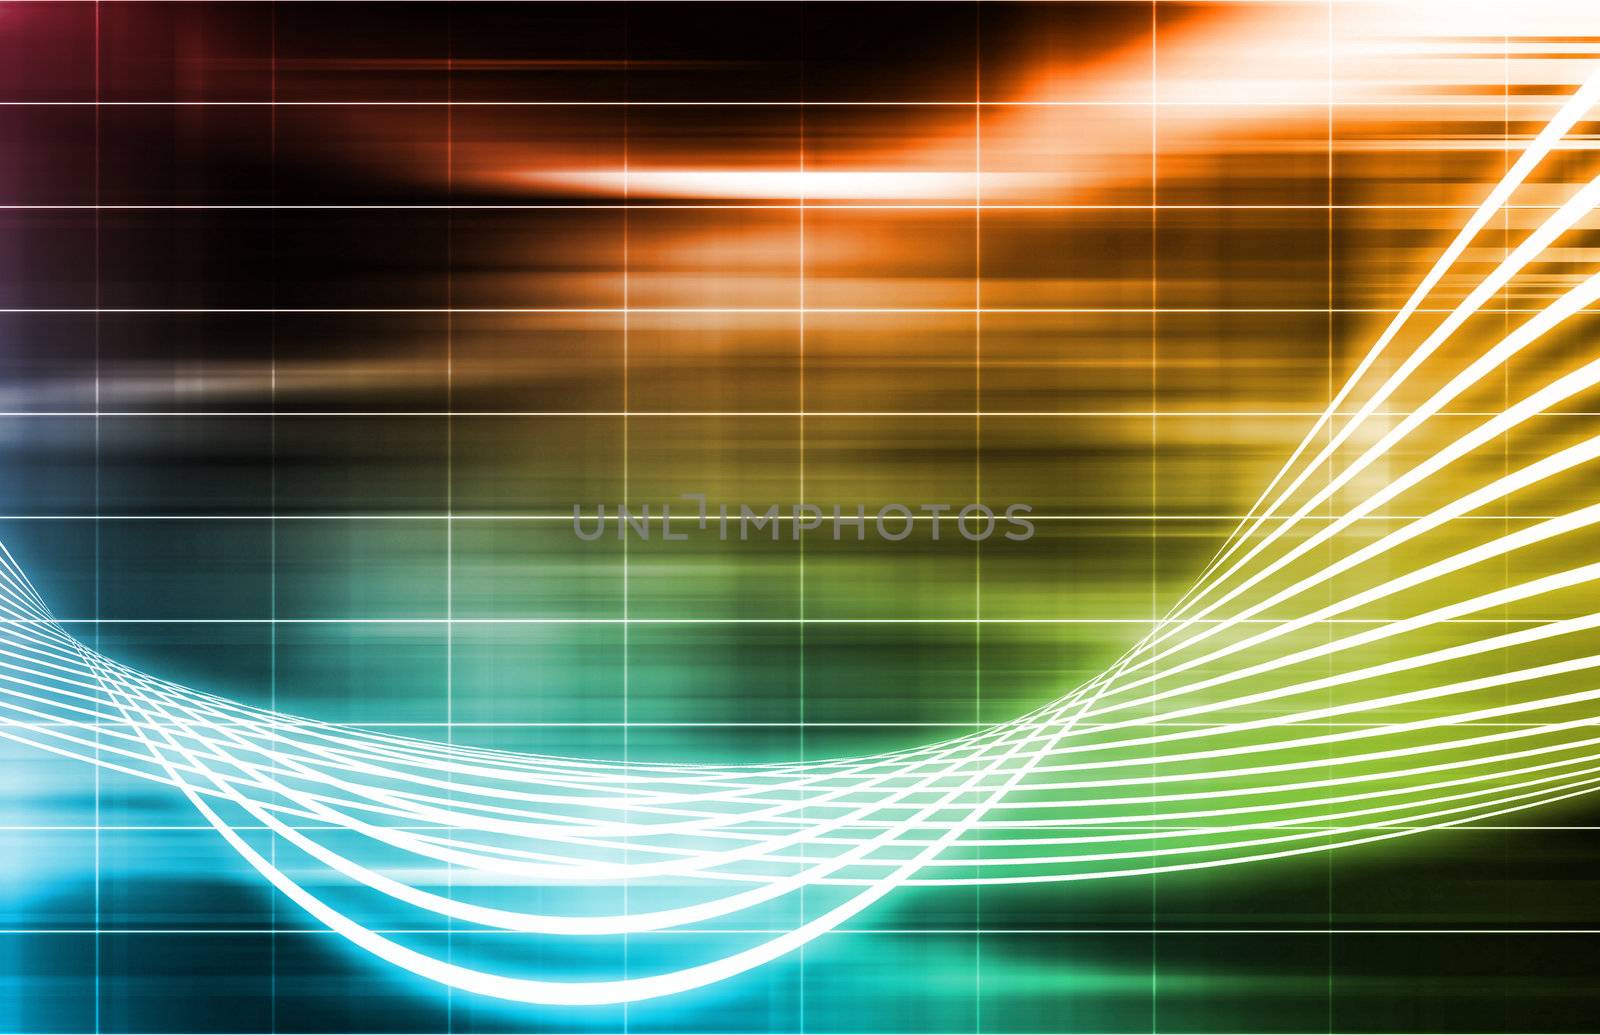 An Information Technology with Glowing Lines